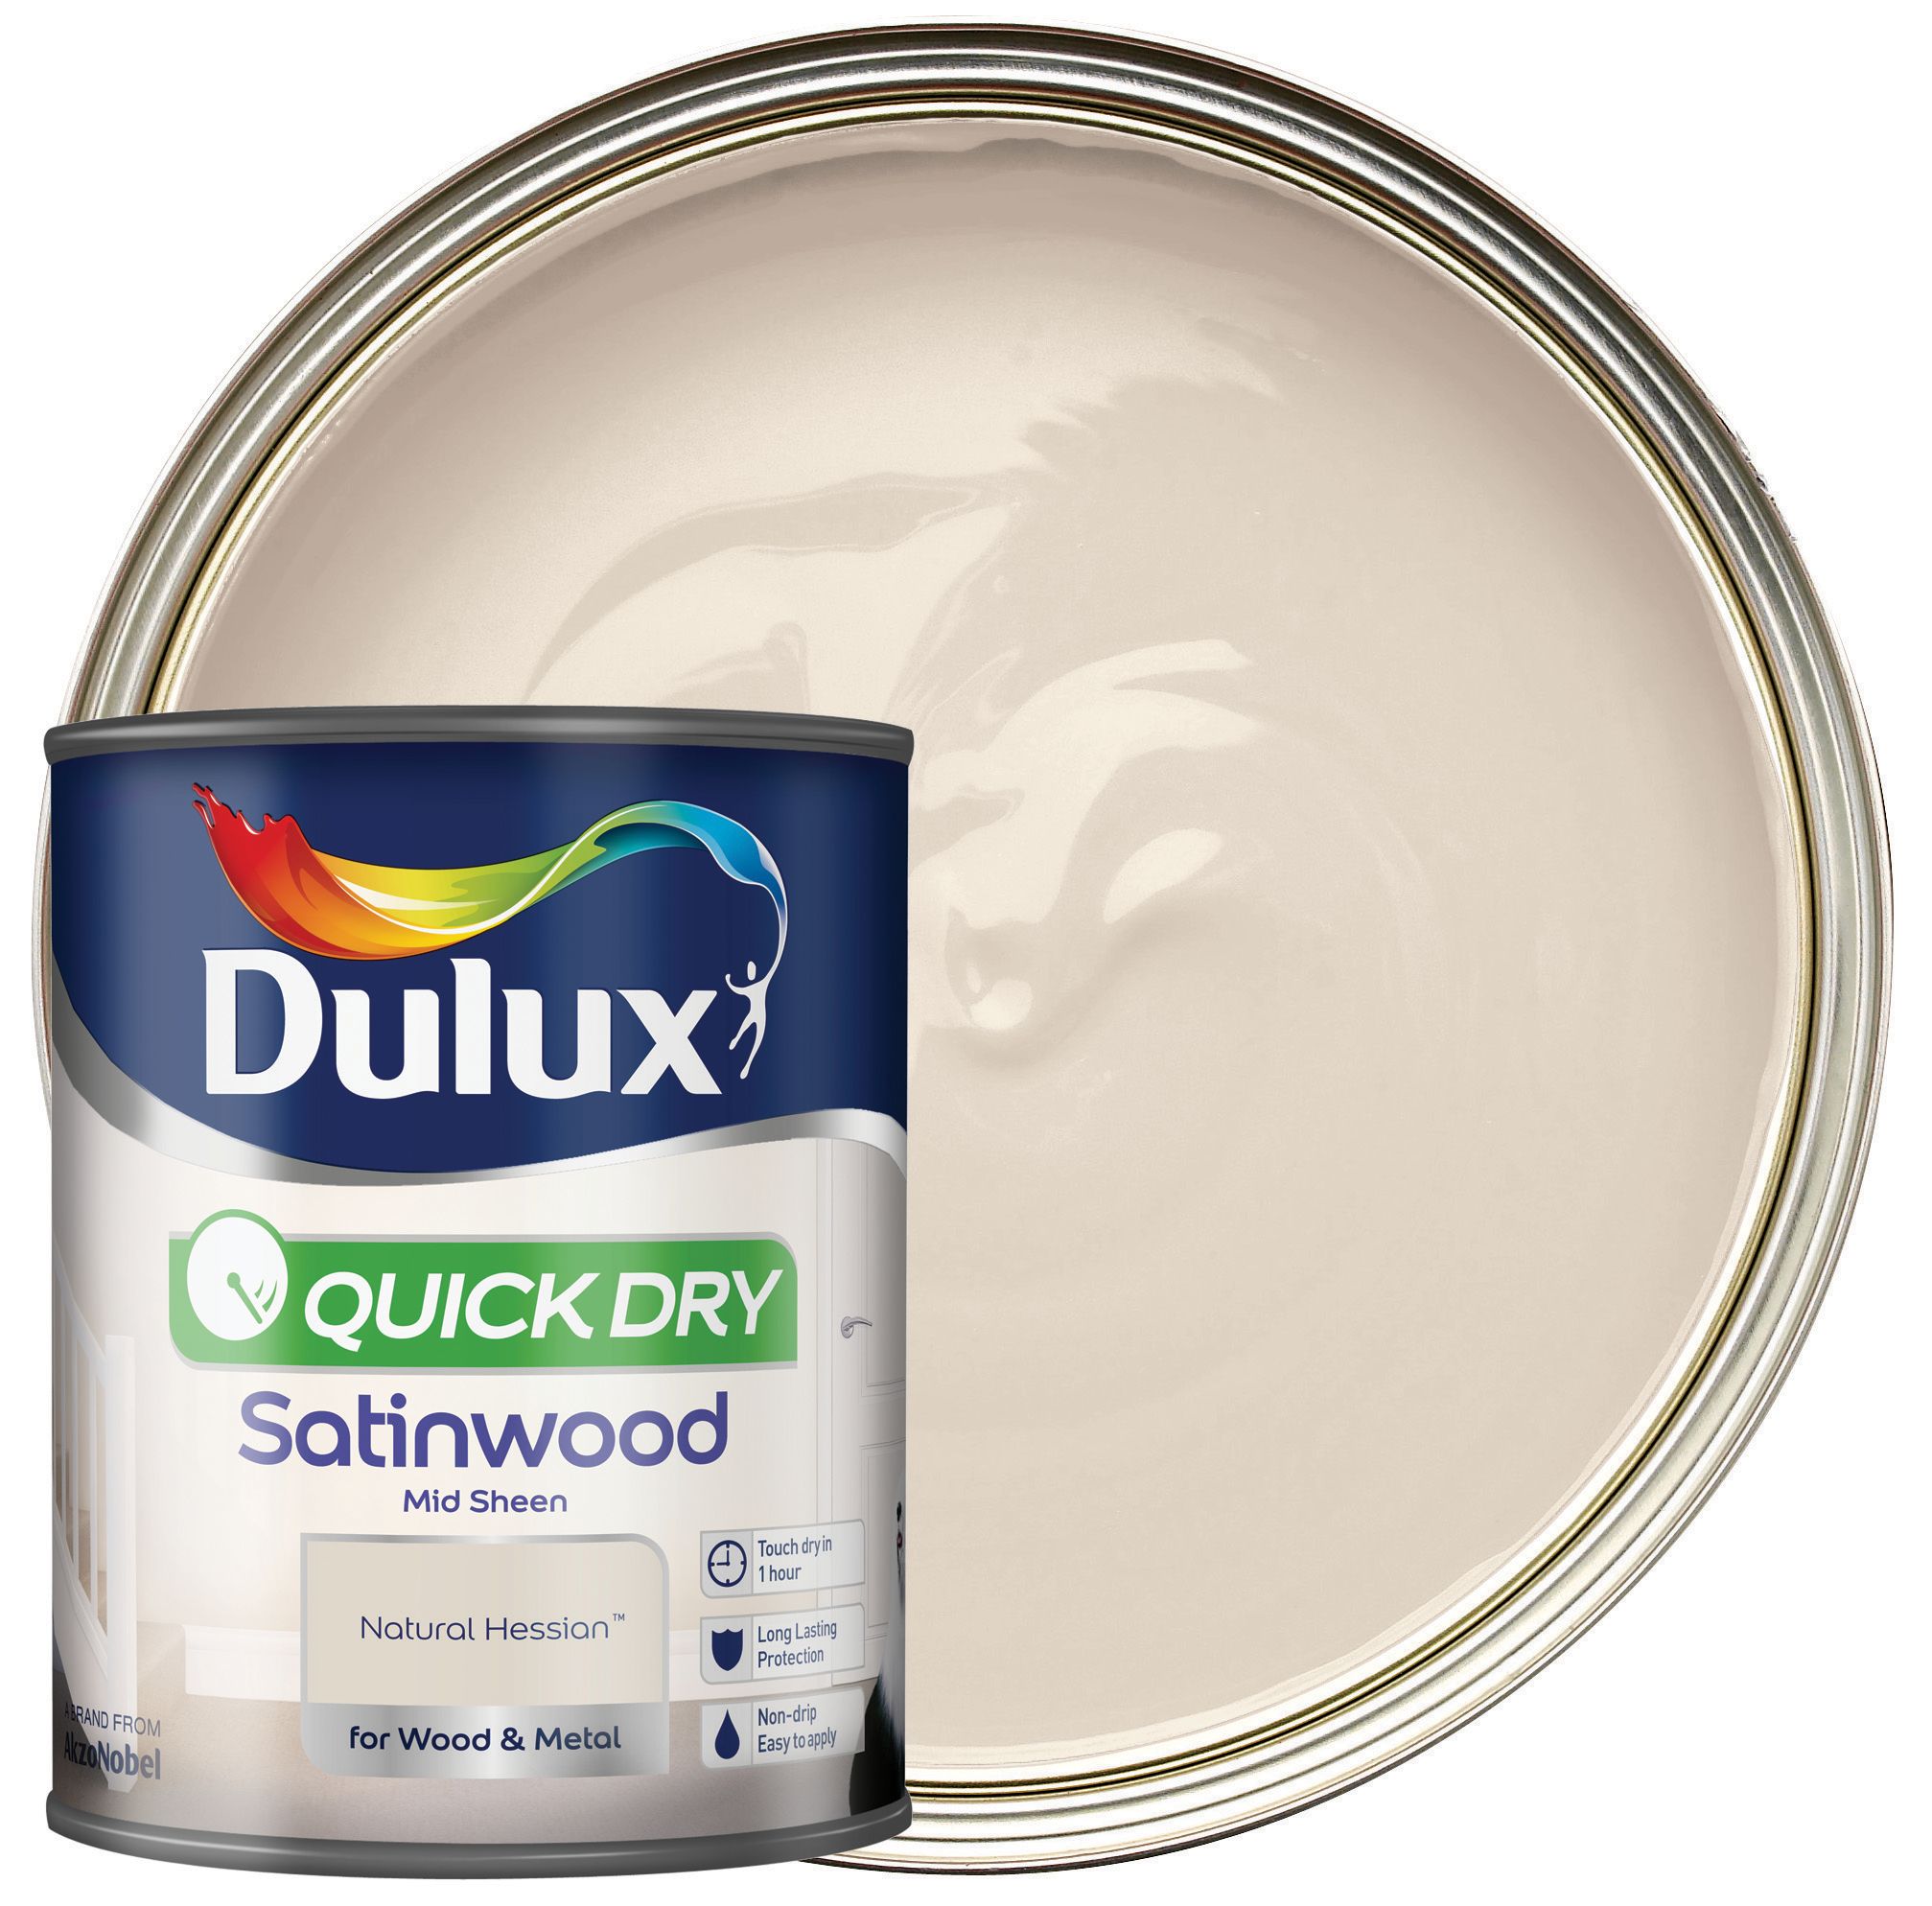 Image of Dulux Quick Dry Satinwood Paint - Natural Hessian - 750ml